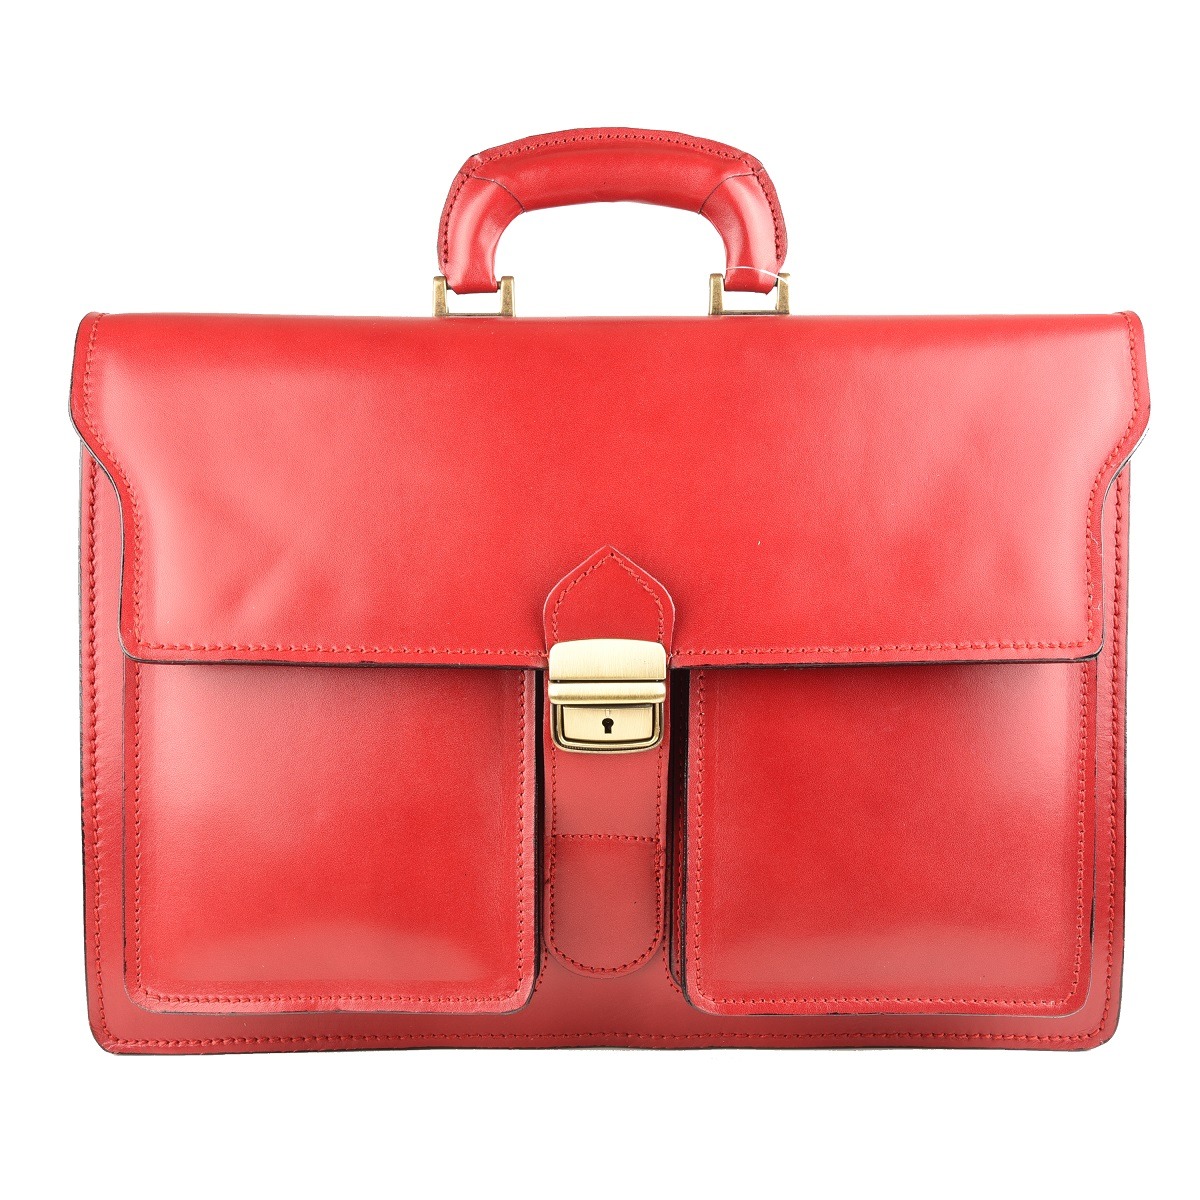 Antonio Professional Leather Briefcase for Men or Women - Red